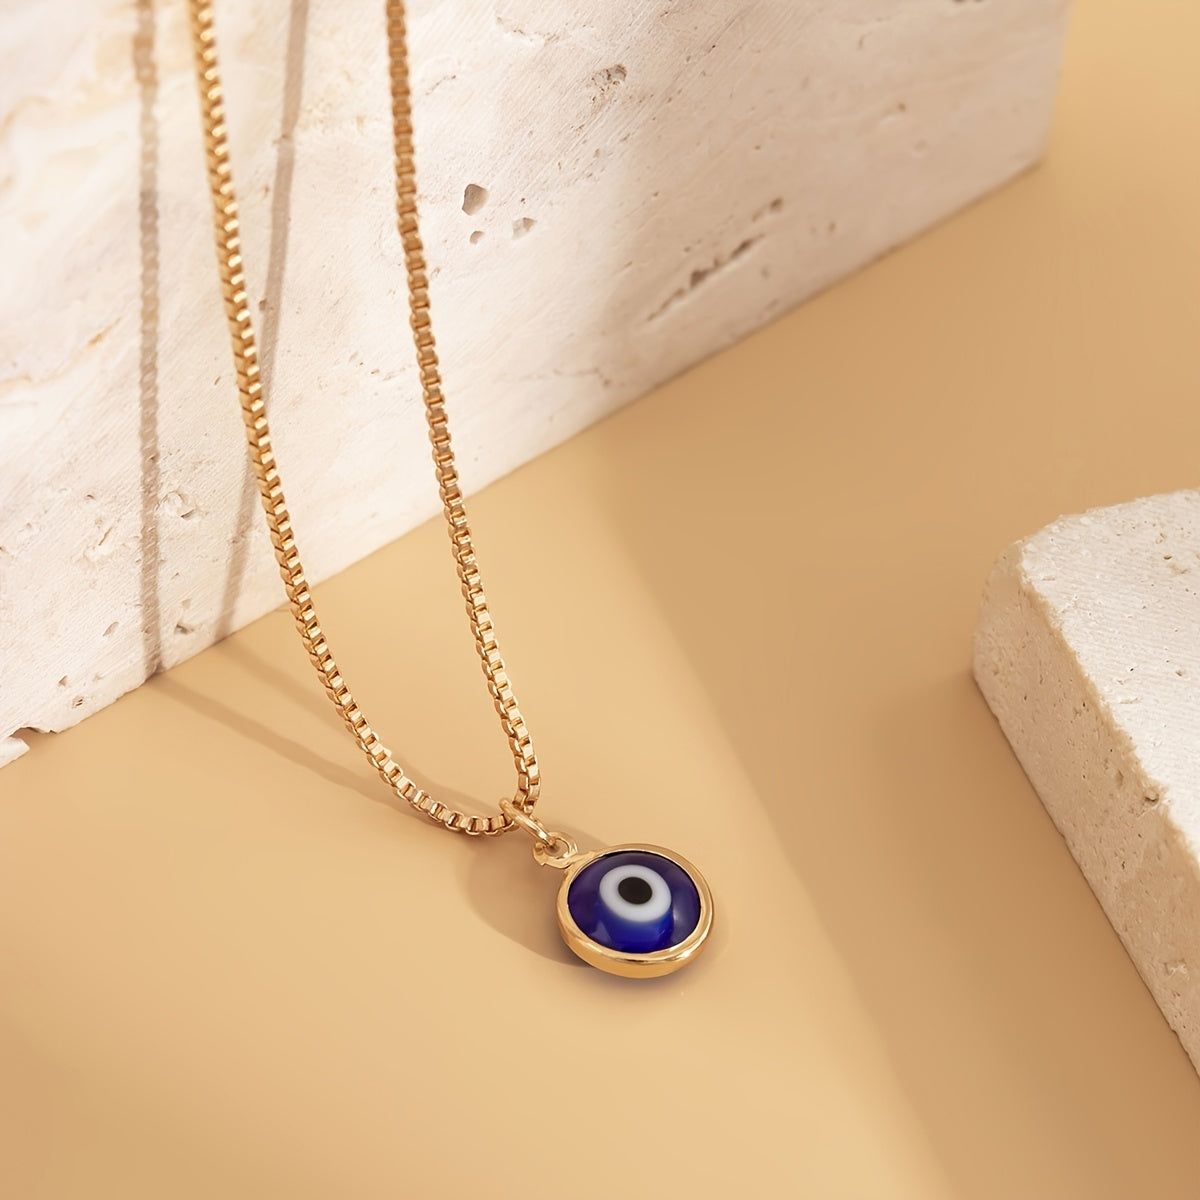 Devil's Eye Shape Pendant Necklace 1 Pc Minimalist Alloy Neck Chain Jewelry Lucky Protection Jewelry Gift